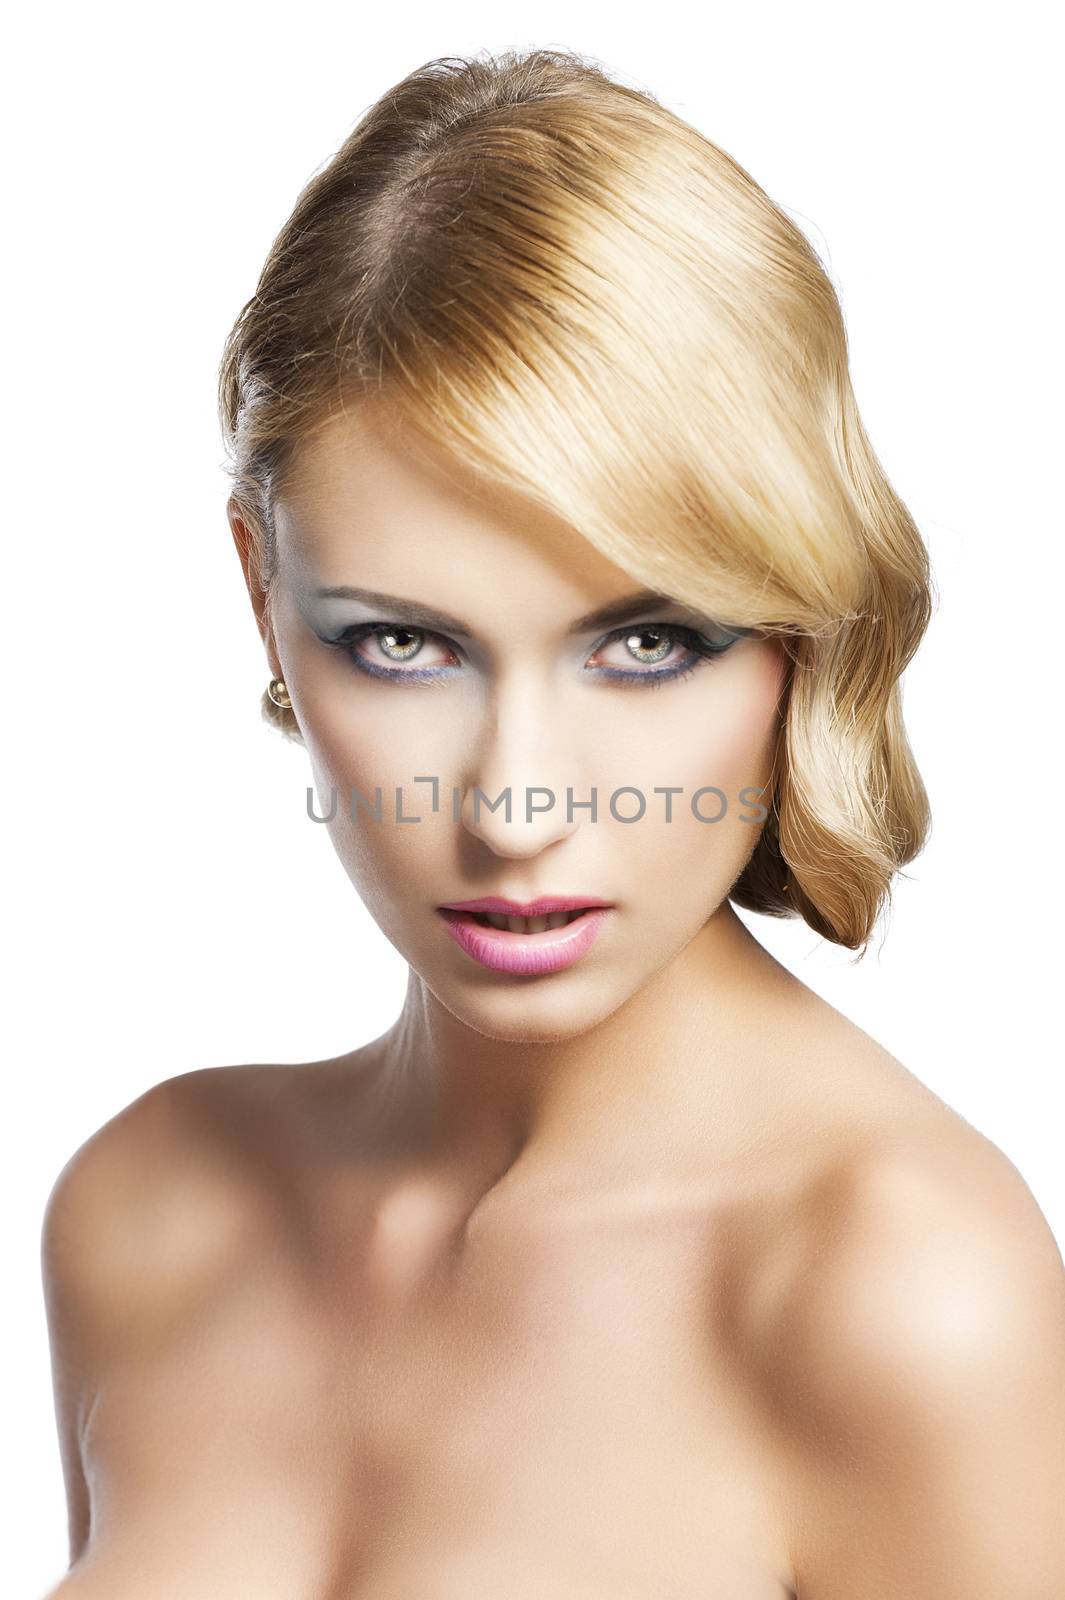 blond beautiful woman with strong make up and an old fashion hair stylish in beauty portrait close up. She looks in to the lens with actractive expression and her mouth is slightly open